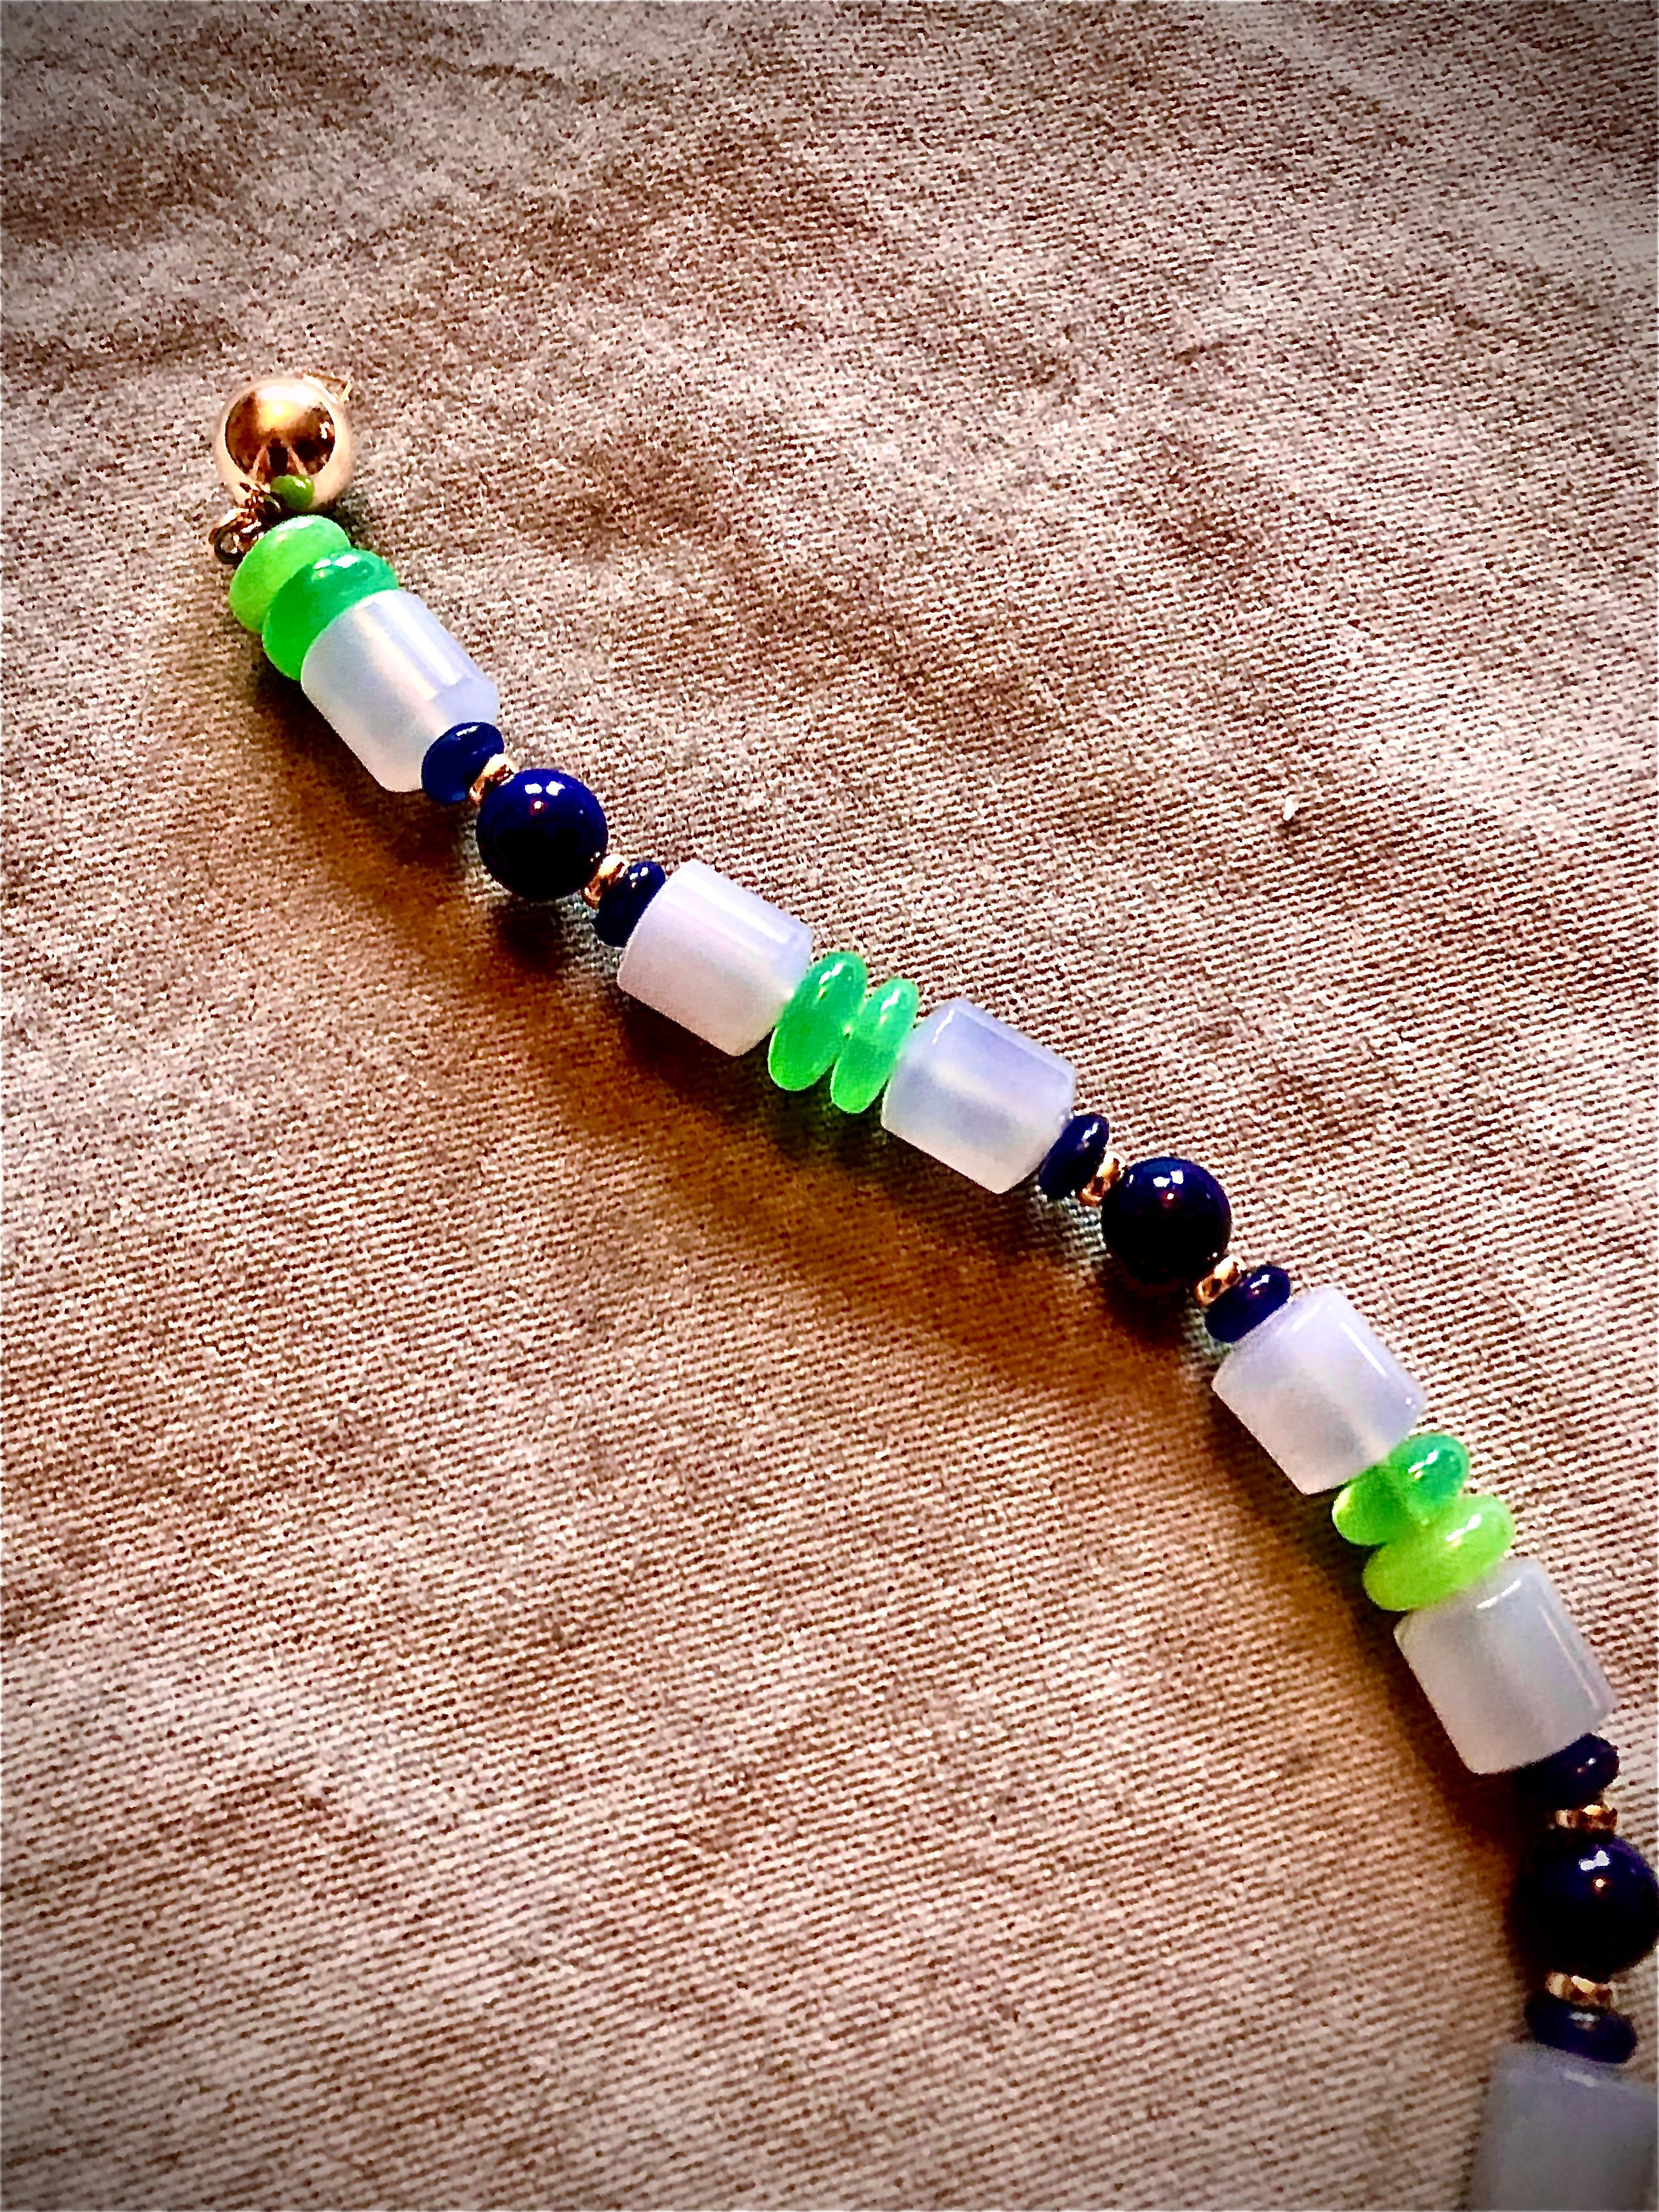 A necklace Nefertiti might have admired. This chic single strand piece features the most prized gem of ancient Egypt, rich blue lapis lazuli. The lapis beads are flanked by 14kt gold smooth rondelles which are in turn are set off with blue sapphire